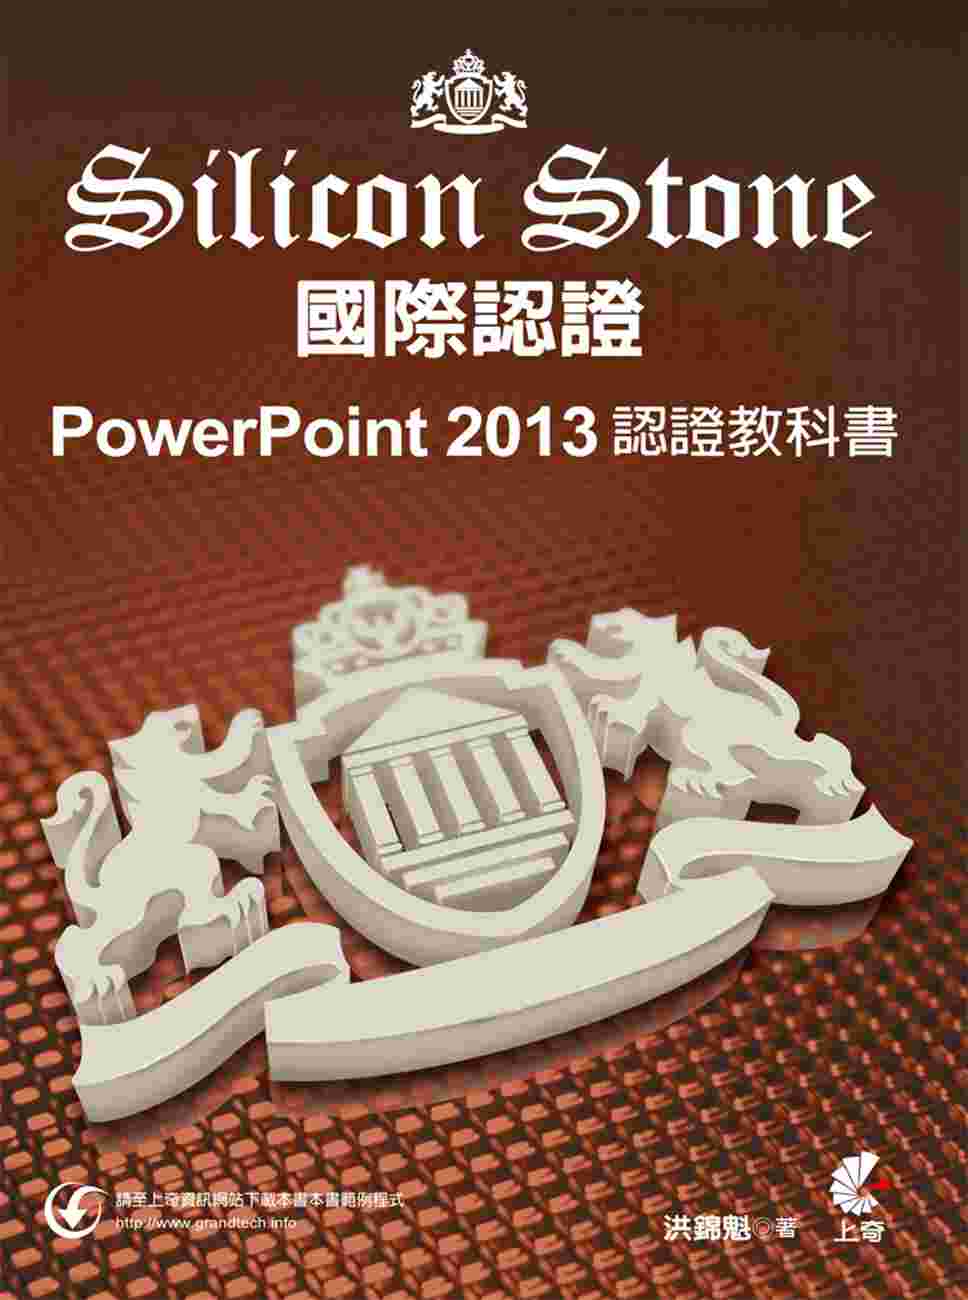 PowerPoint 2013 Silicon Stone 認證教科書